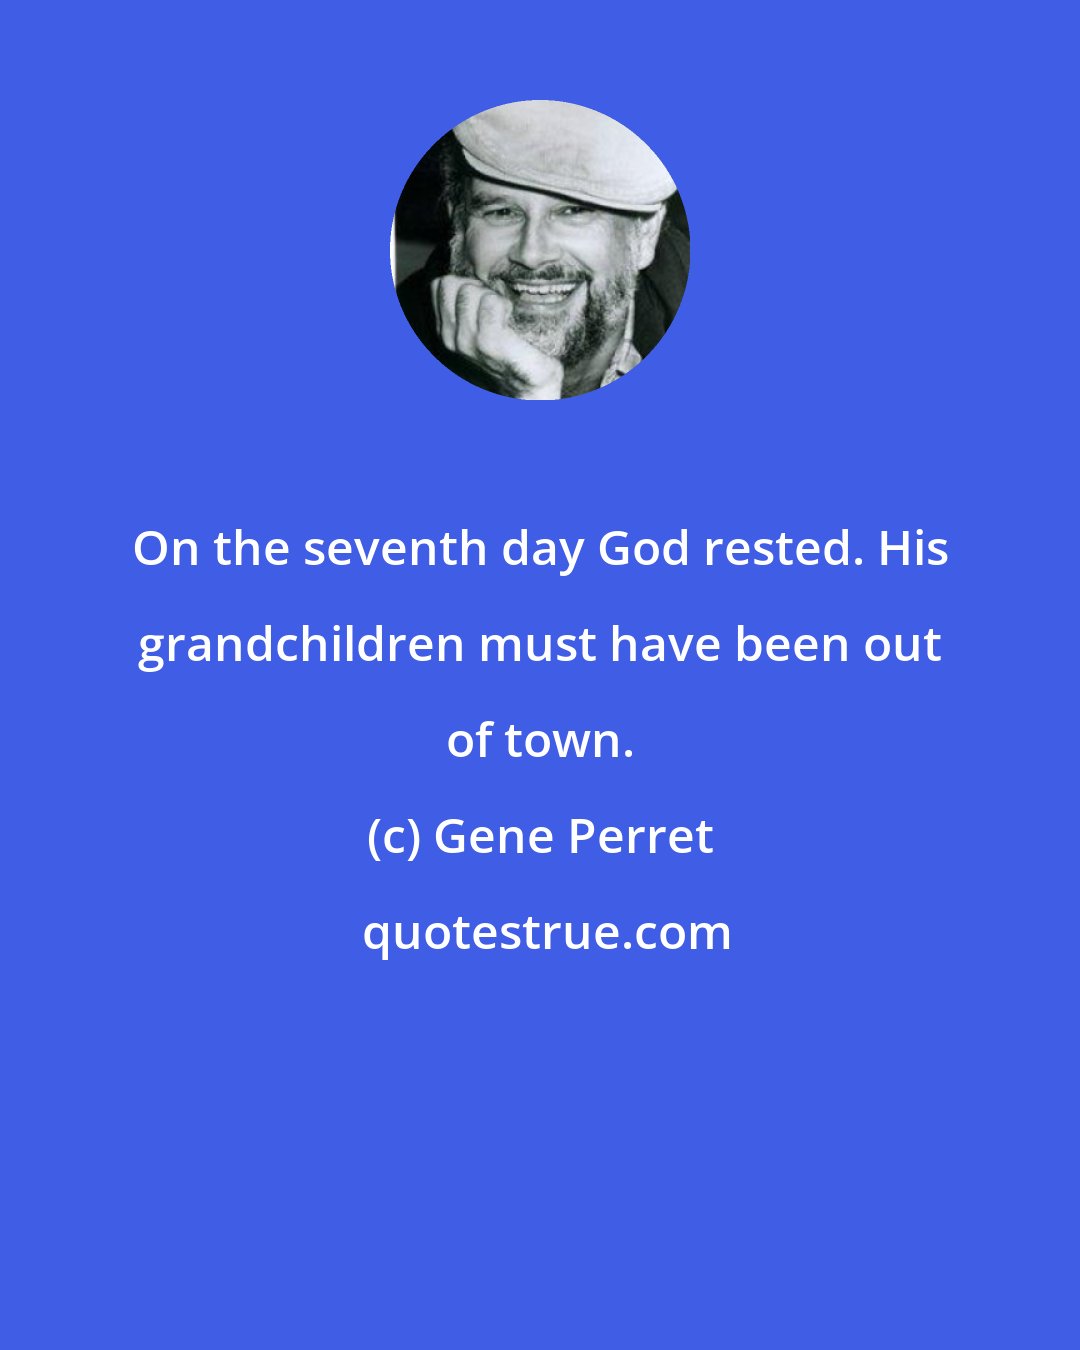 Gene Perret: On the seventh day God rested. His grandchildren must have been out of town.